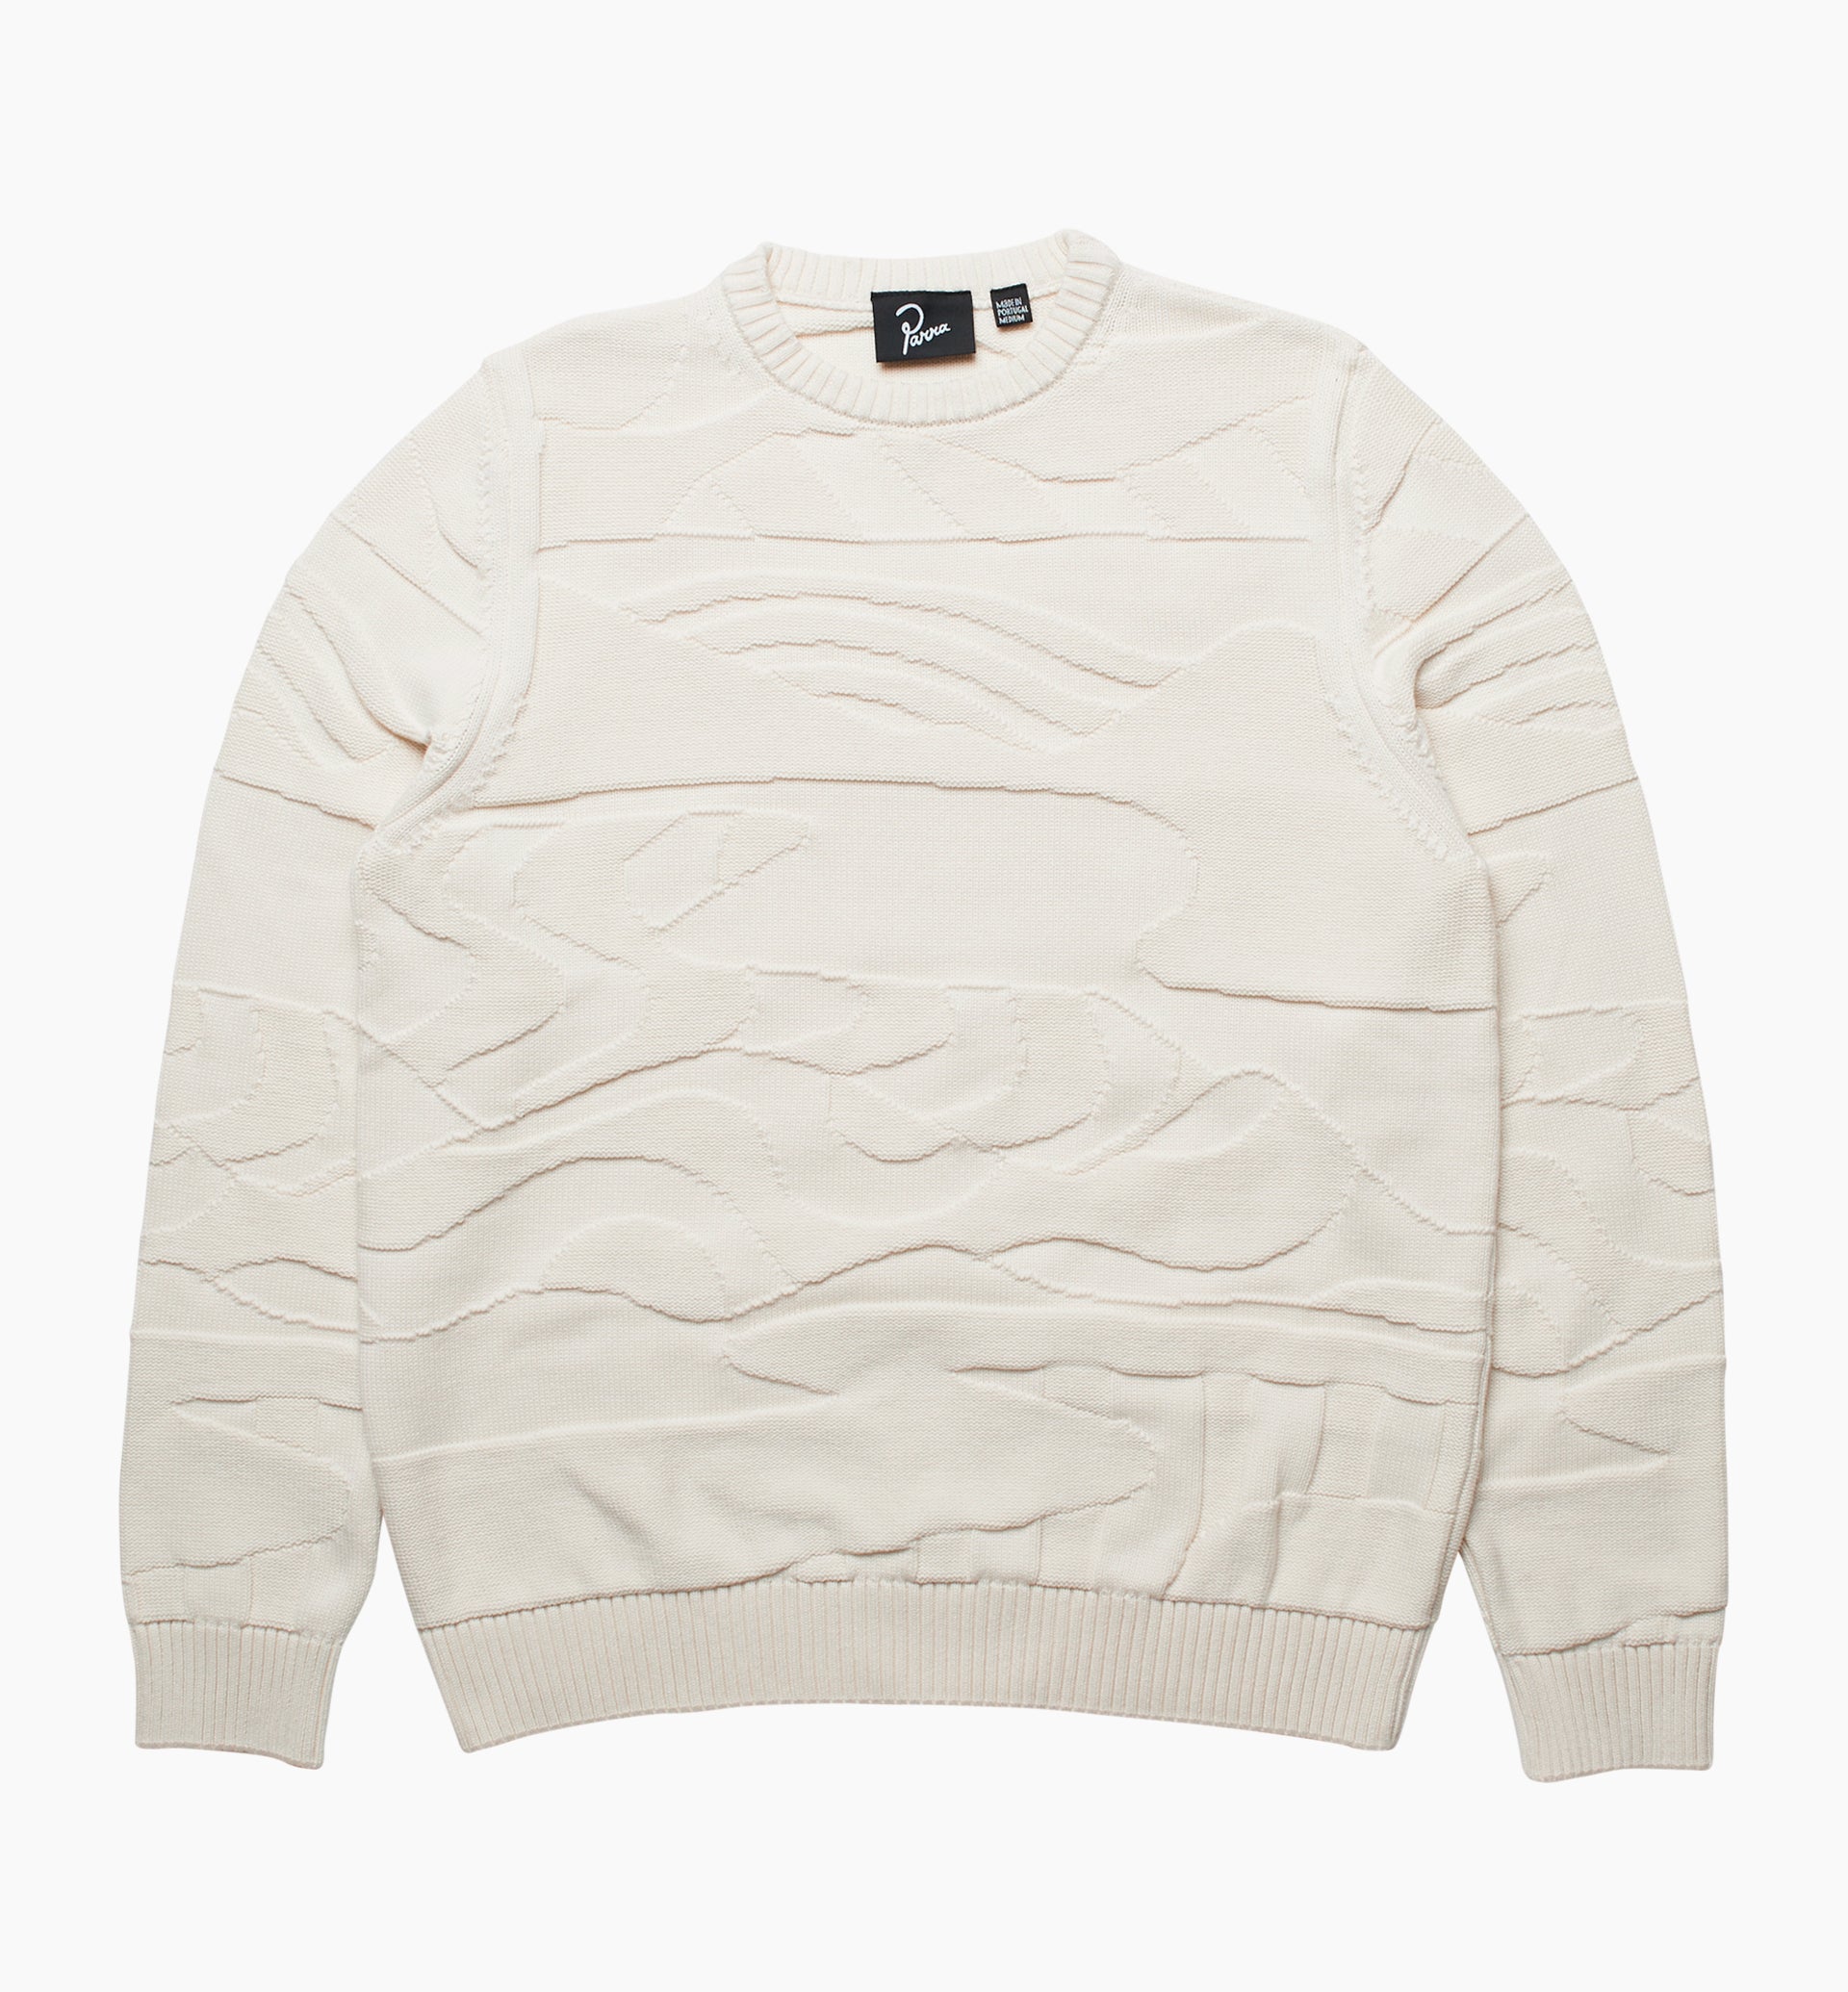 Parra - landscaped knitted pullover